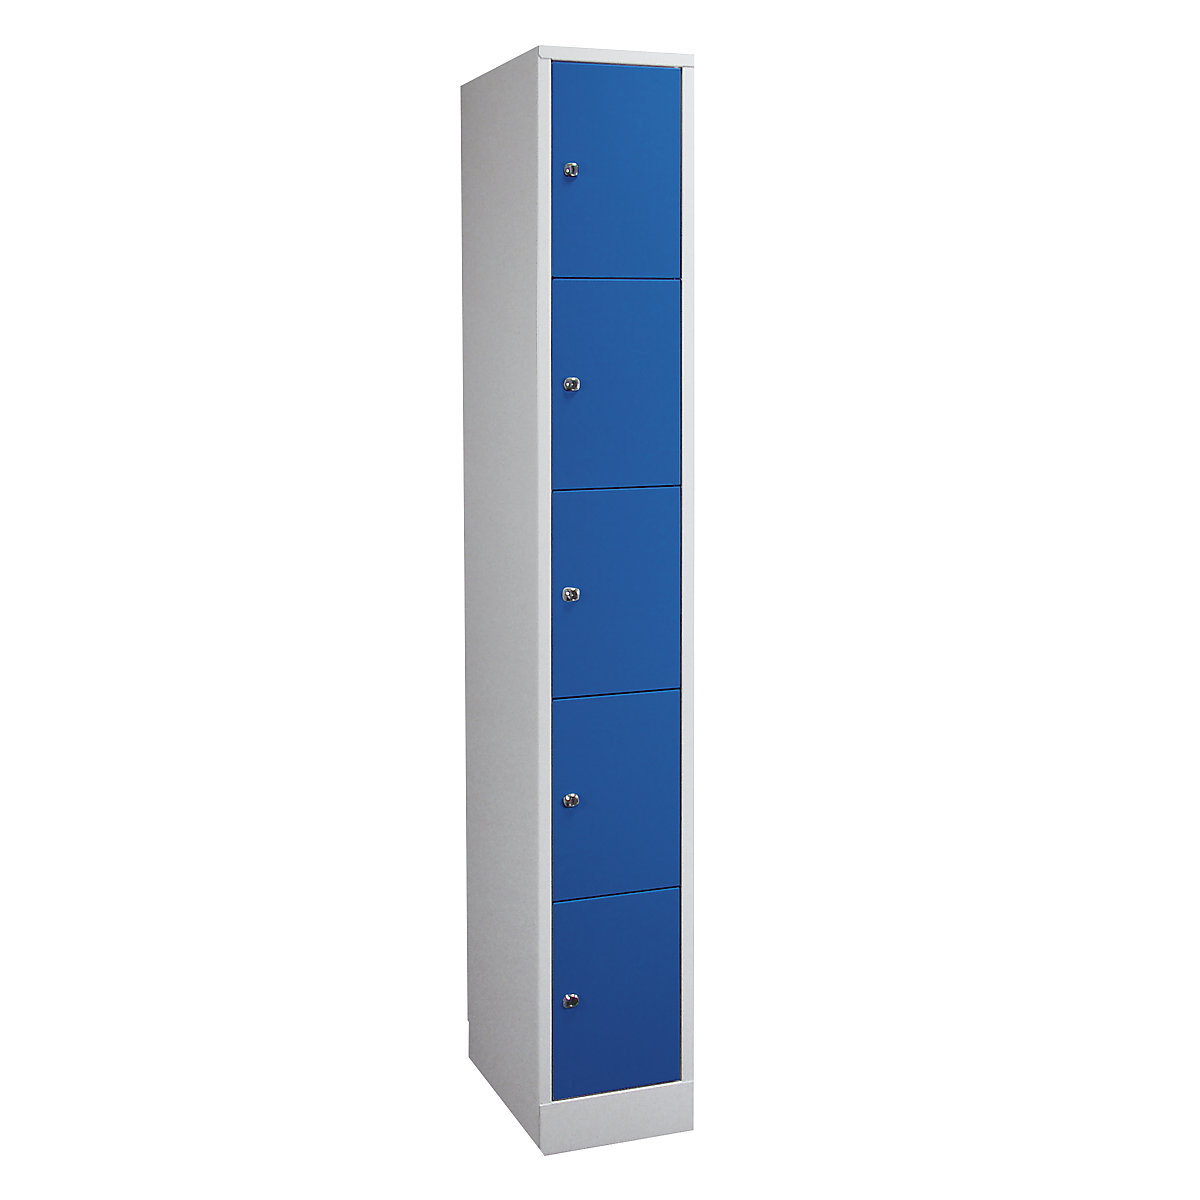 Clothes lockers in practical sizes – Wolf, 5 compartments, width 400 mm, light grey / gentian blue-4